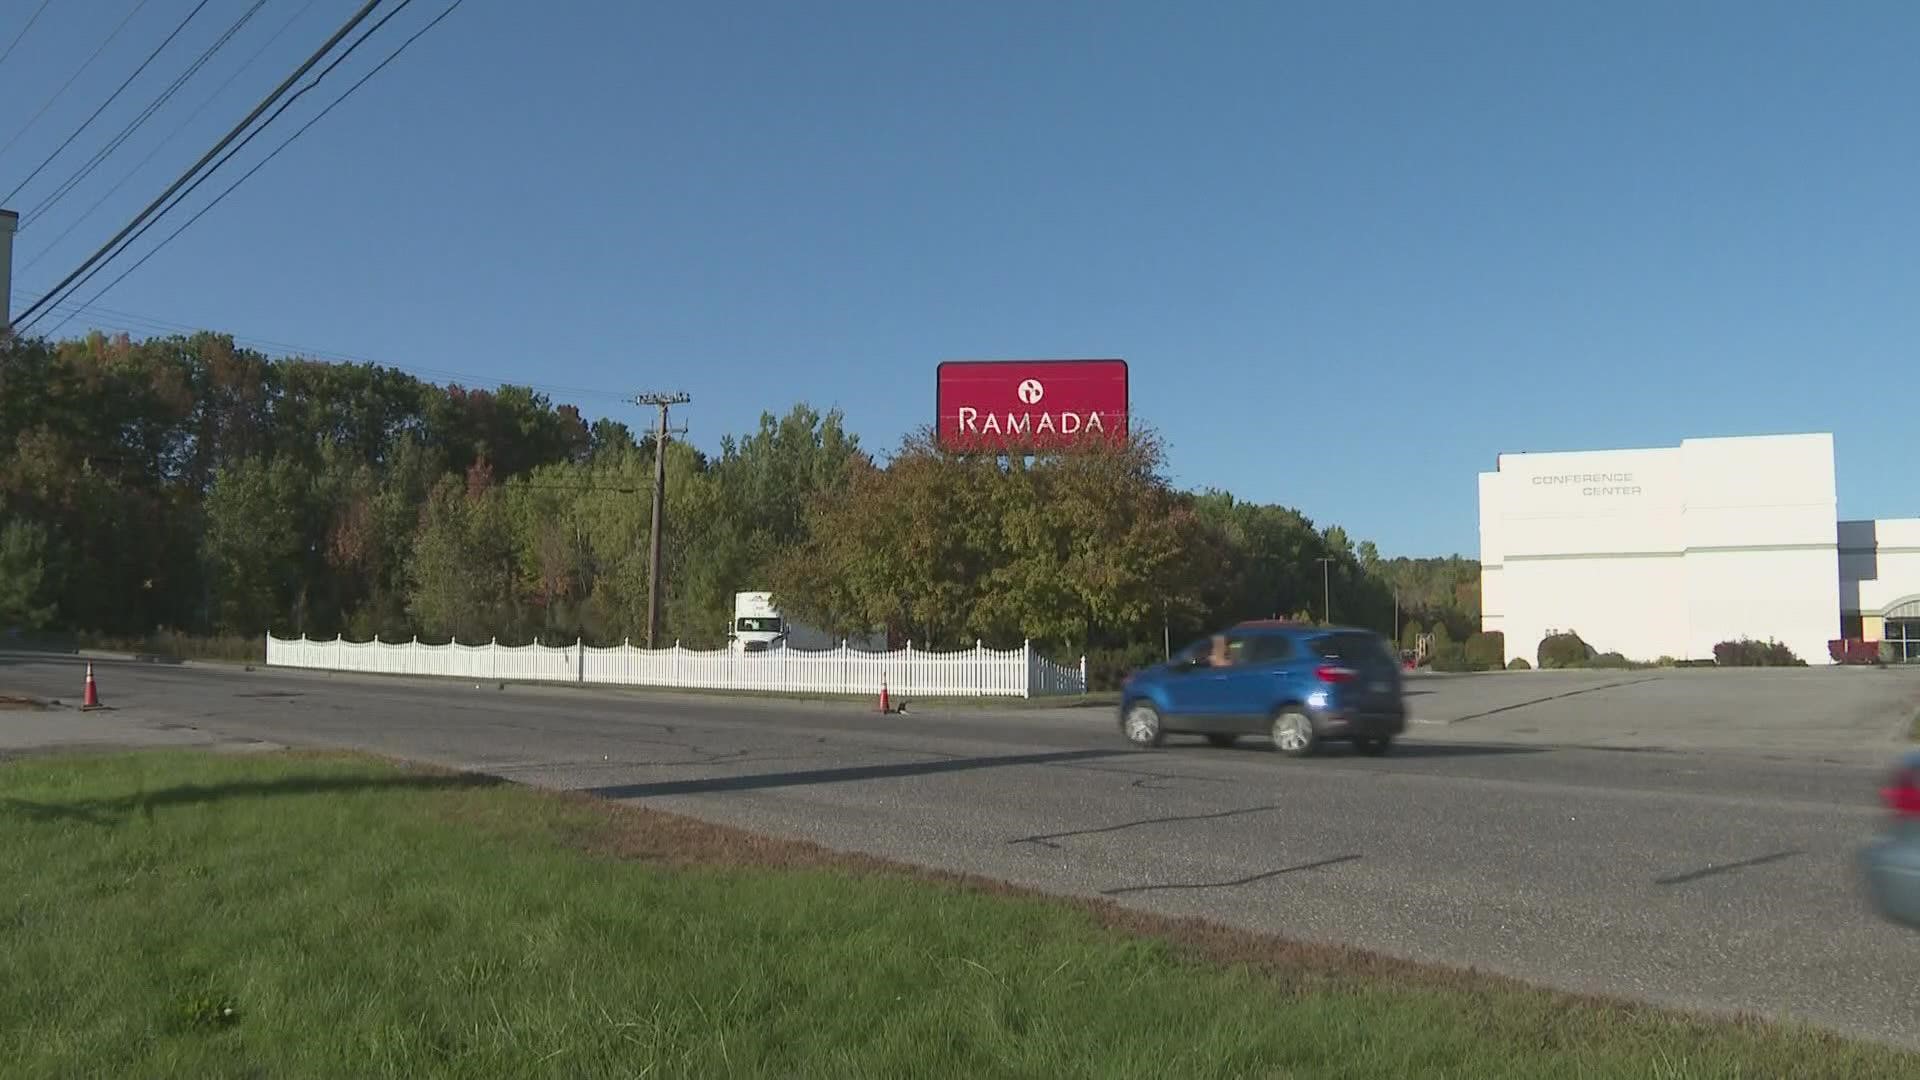 Wedding guests said they saw people leave the restricted area in the quarantine section of the Ramada Inn in Lewiston and go outside to smoke cigarettes.